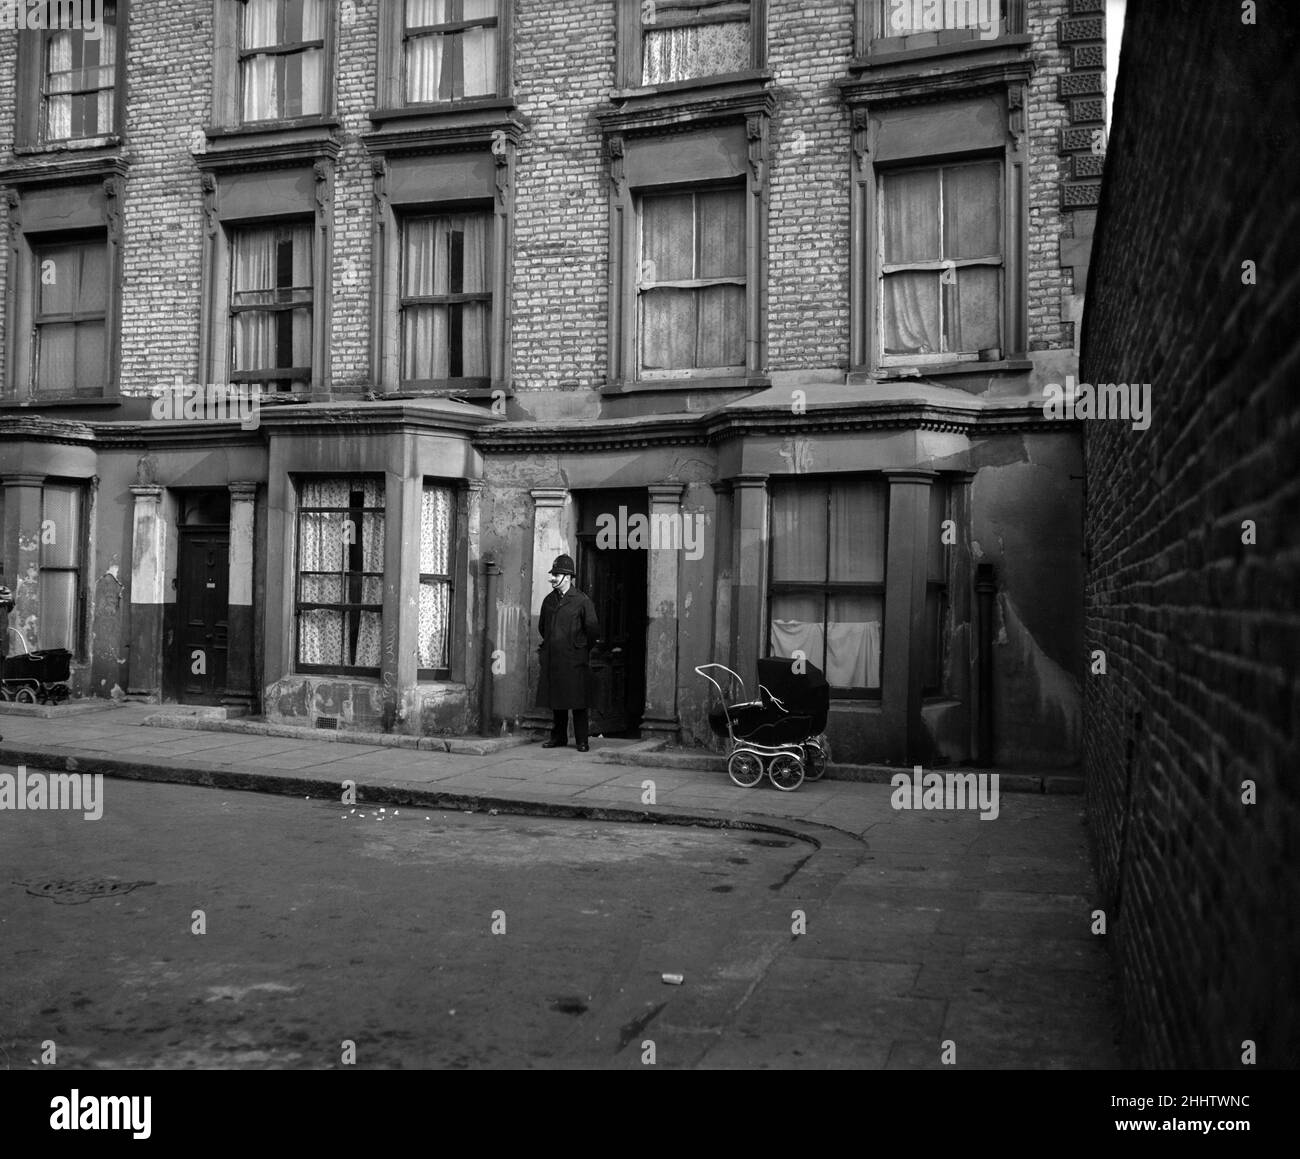 A general view of Rillington Place in west London where at Number 10 the bodies of four women were found. It was in this house that John Christie had lived and moved out of during March 1953, soon afterward the bodies of three of his victims were discovered hidden in an alcove in the kitchen. His wife's body was found beneath the floorboards of the front room. 25th March 1953. Stock Photo